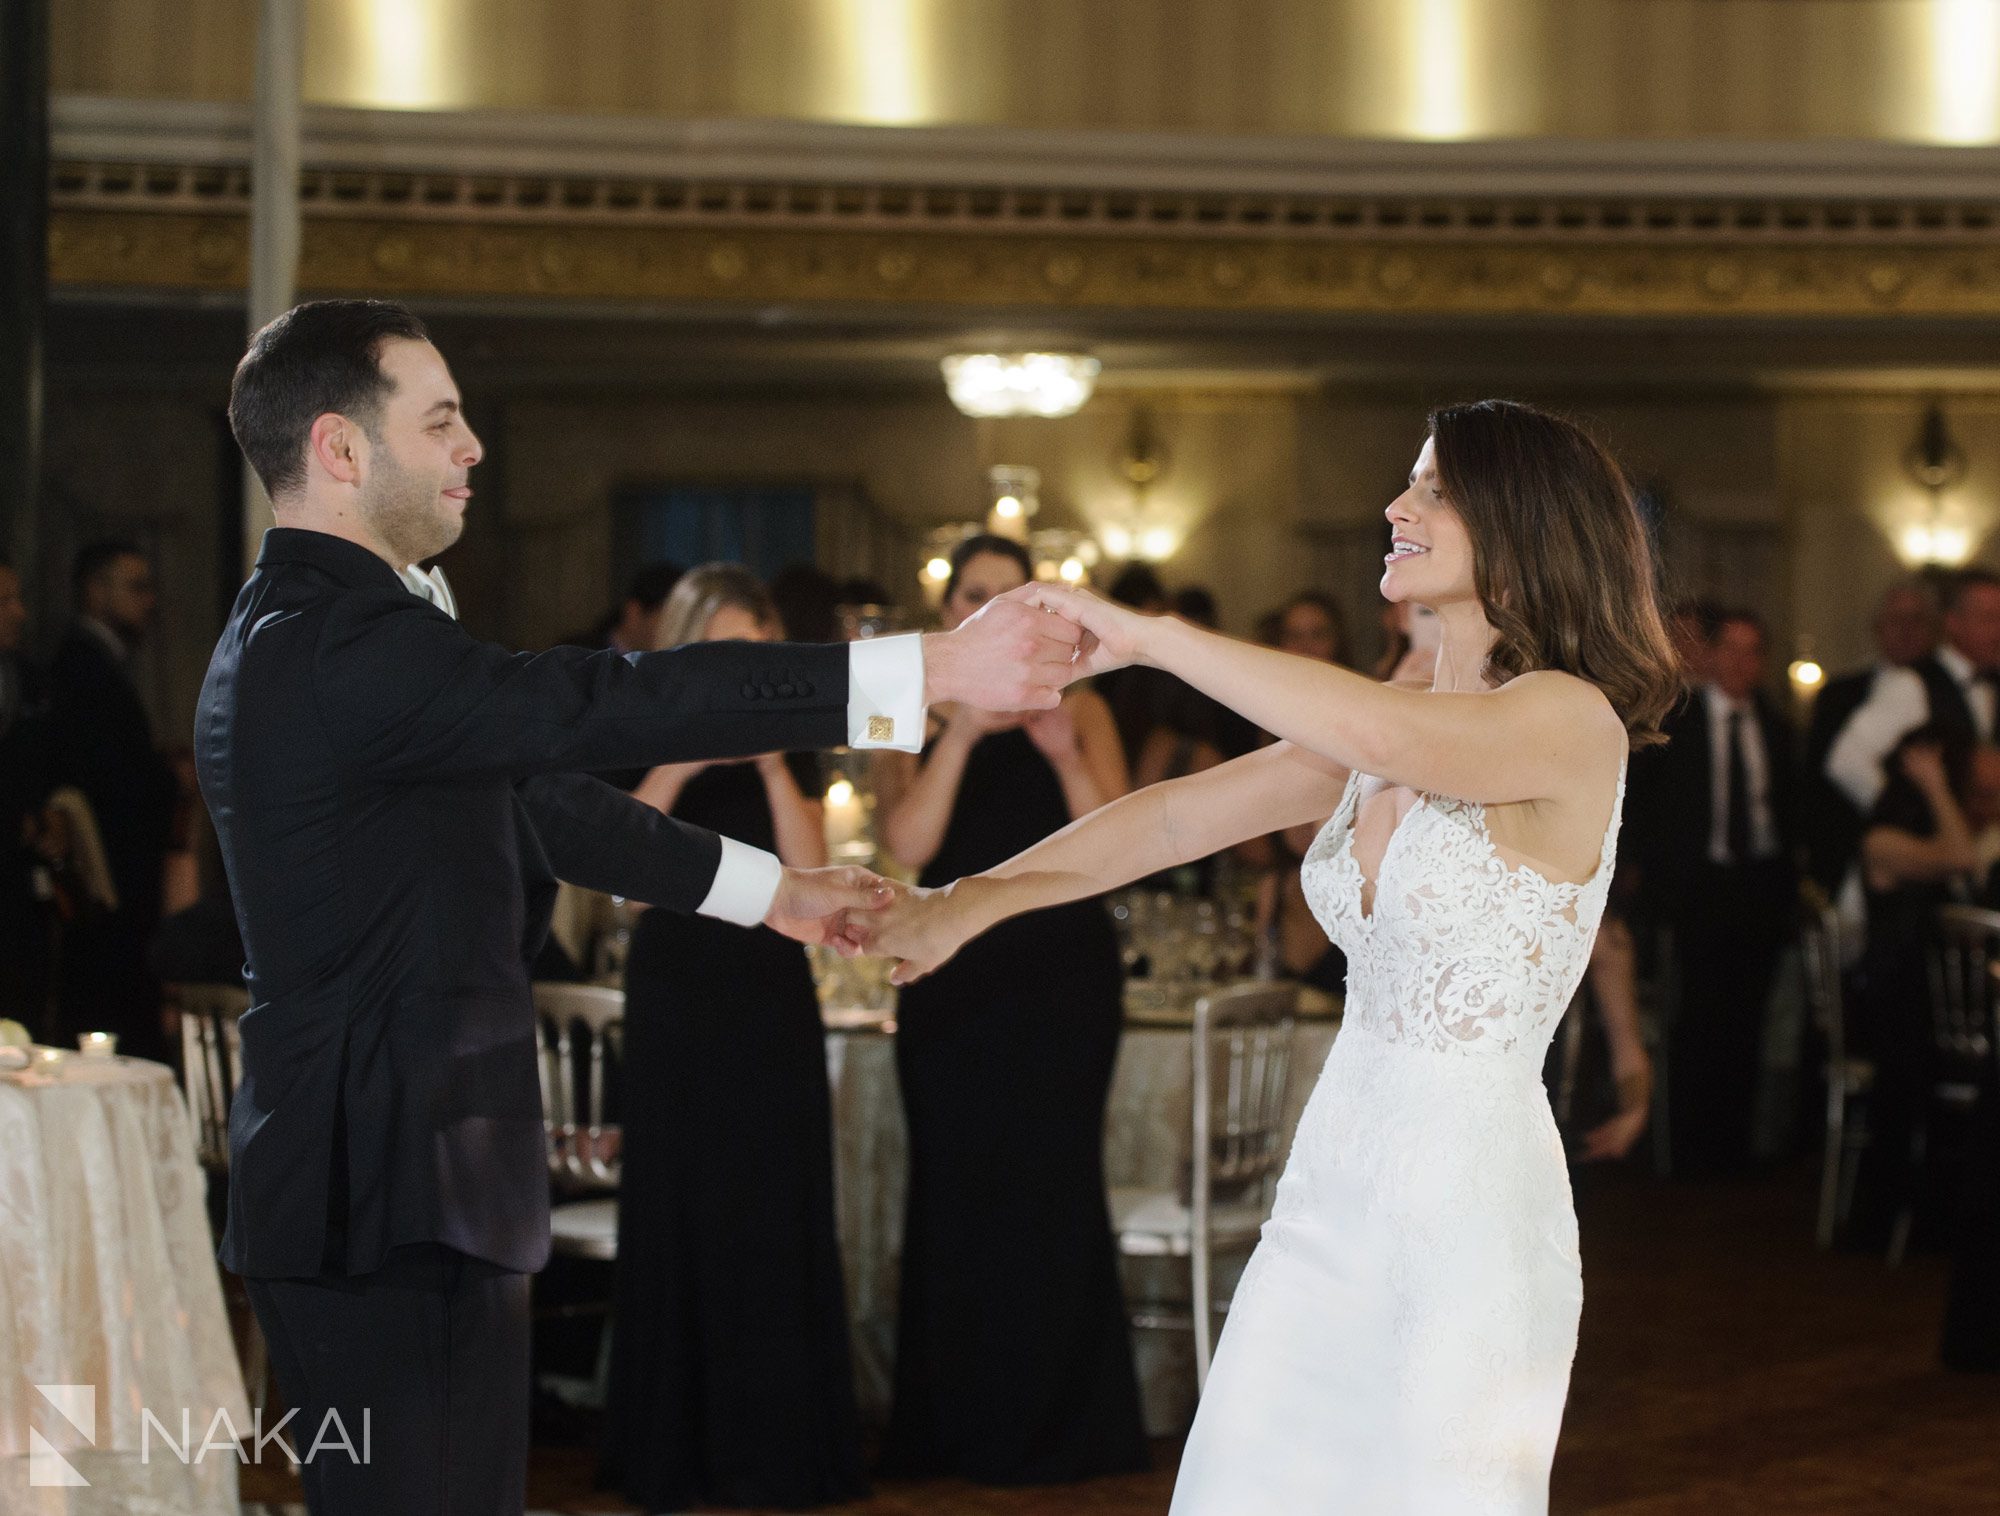 intercontinental magnificent mile reception wedding pictures grand ballroom